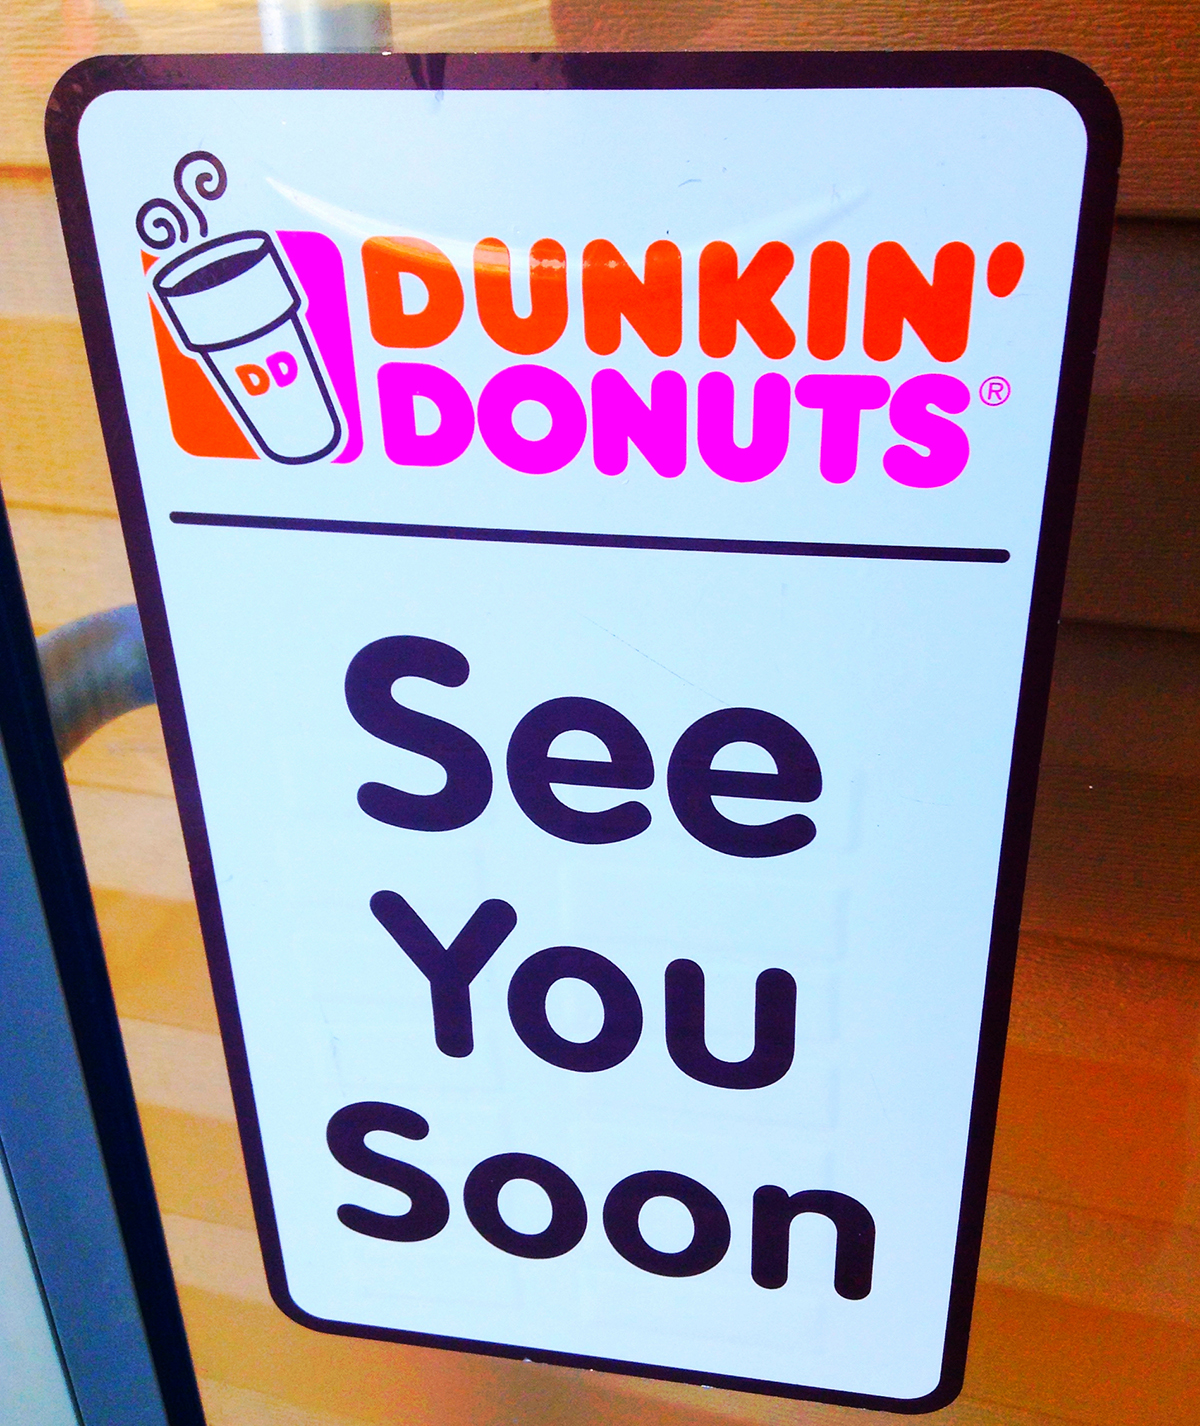 Dunkin Donuts by Mike Mozart / Photo via Flickr / Creative Commons